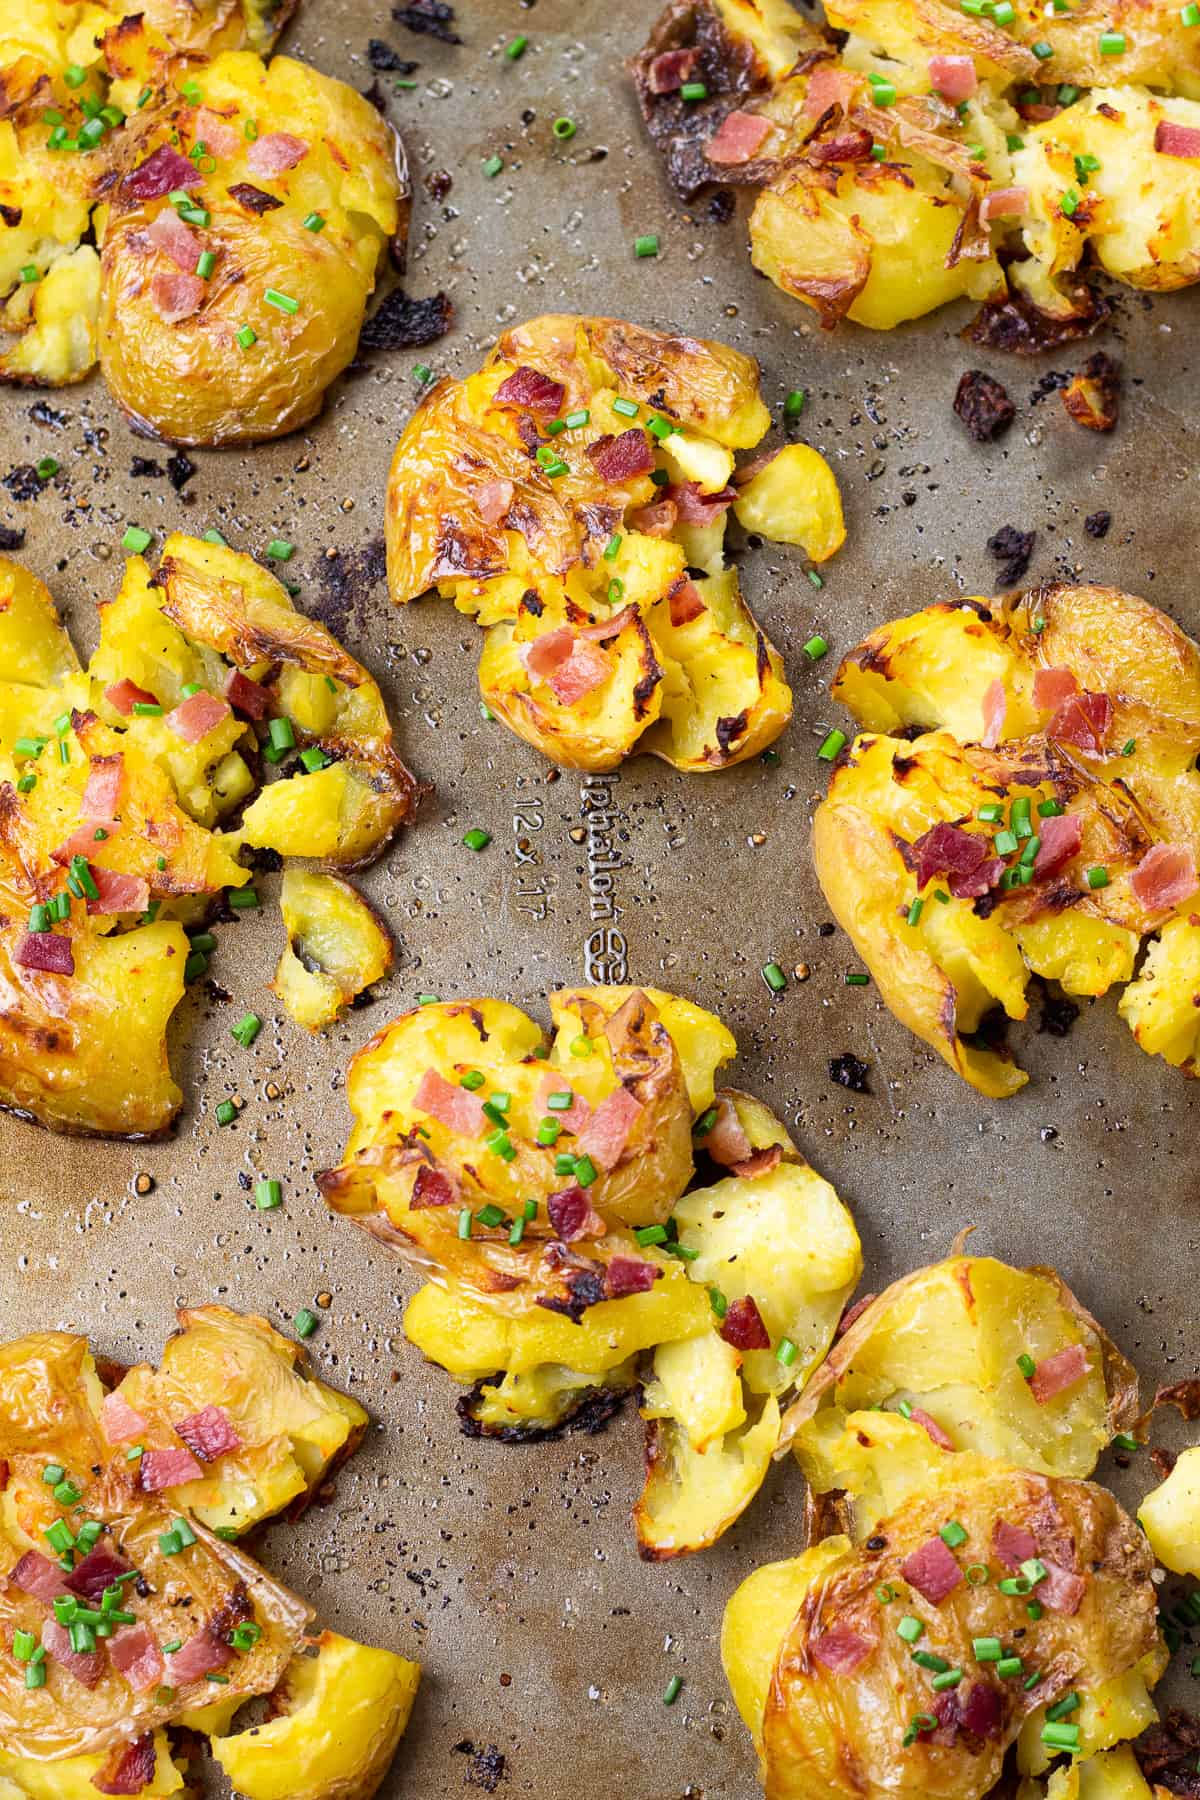 Baked smashed potatoes topped with bacon and chives.